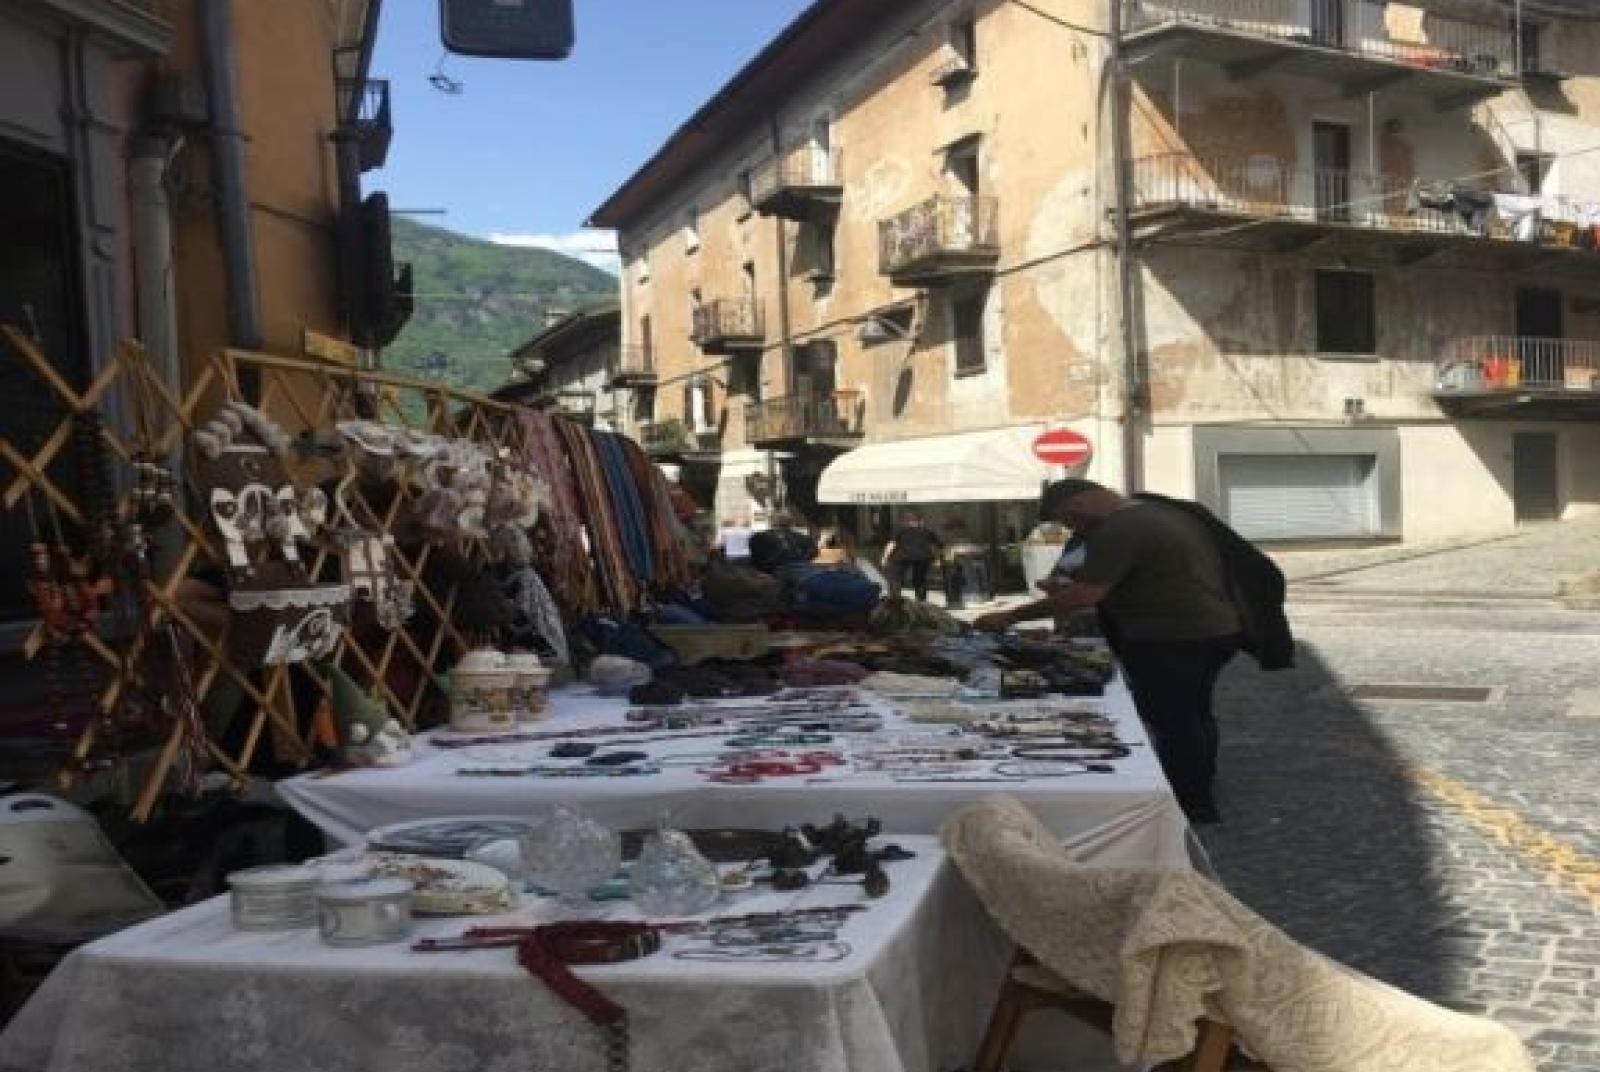 Second-Hand and Swap Street Market